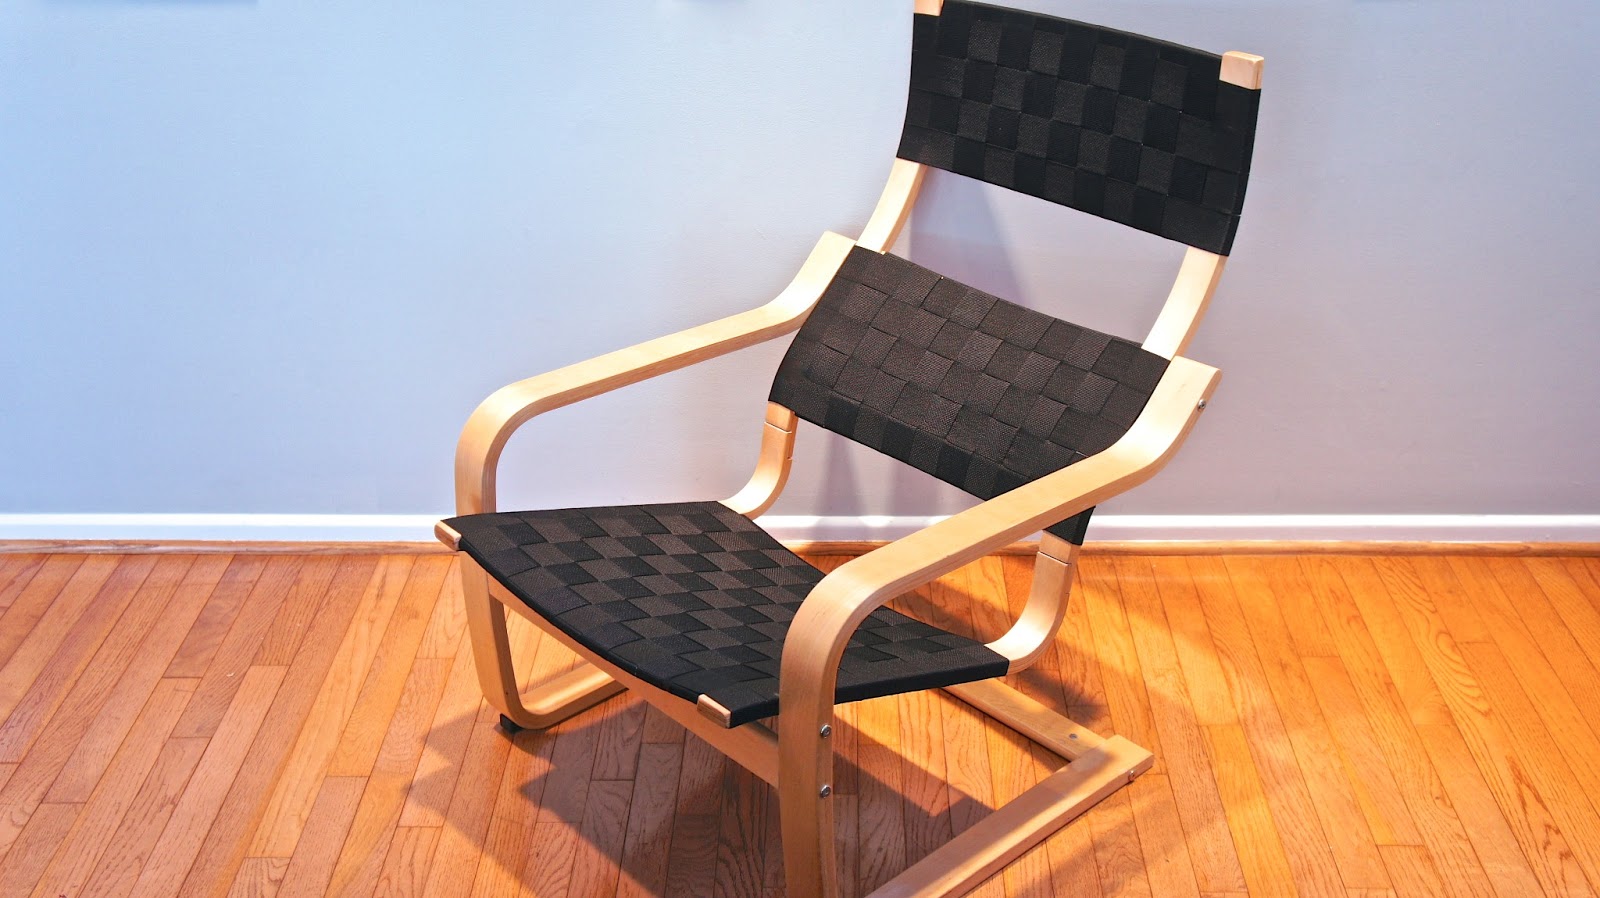 Ikea Poang Chair Hack - Nylon Paracord Project